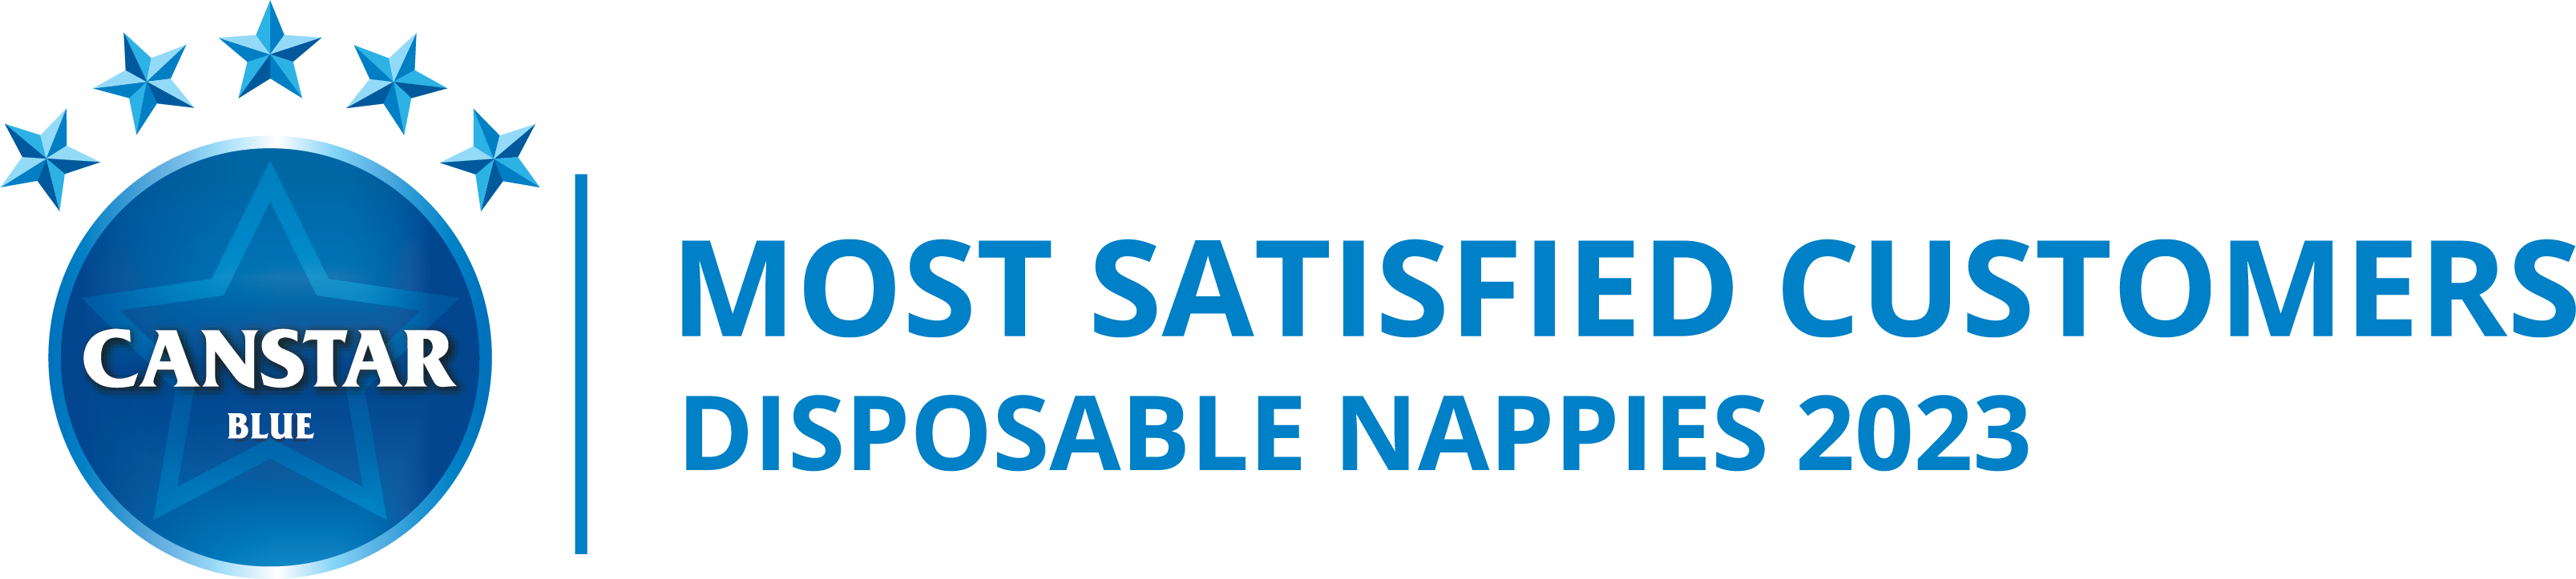 CANSTAR most satisfied customers disposable nappies 2023